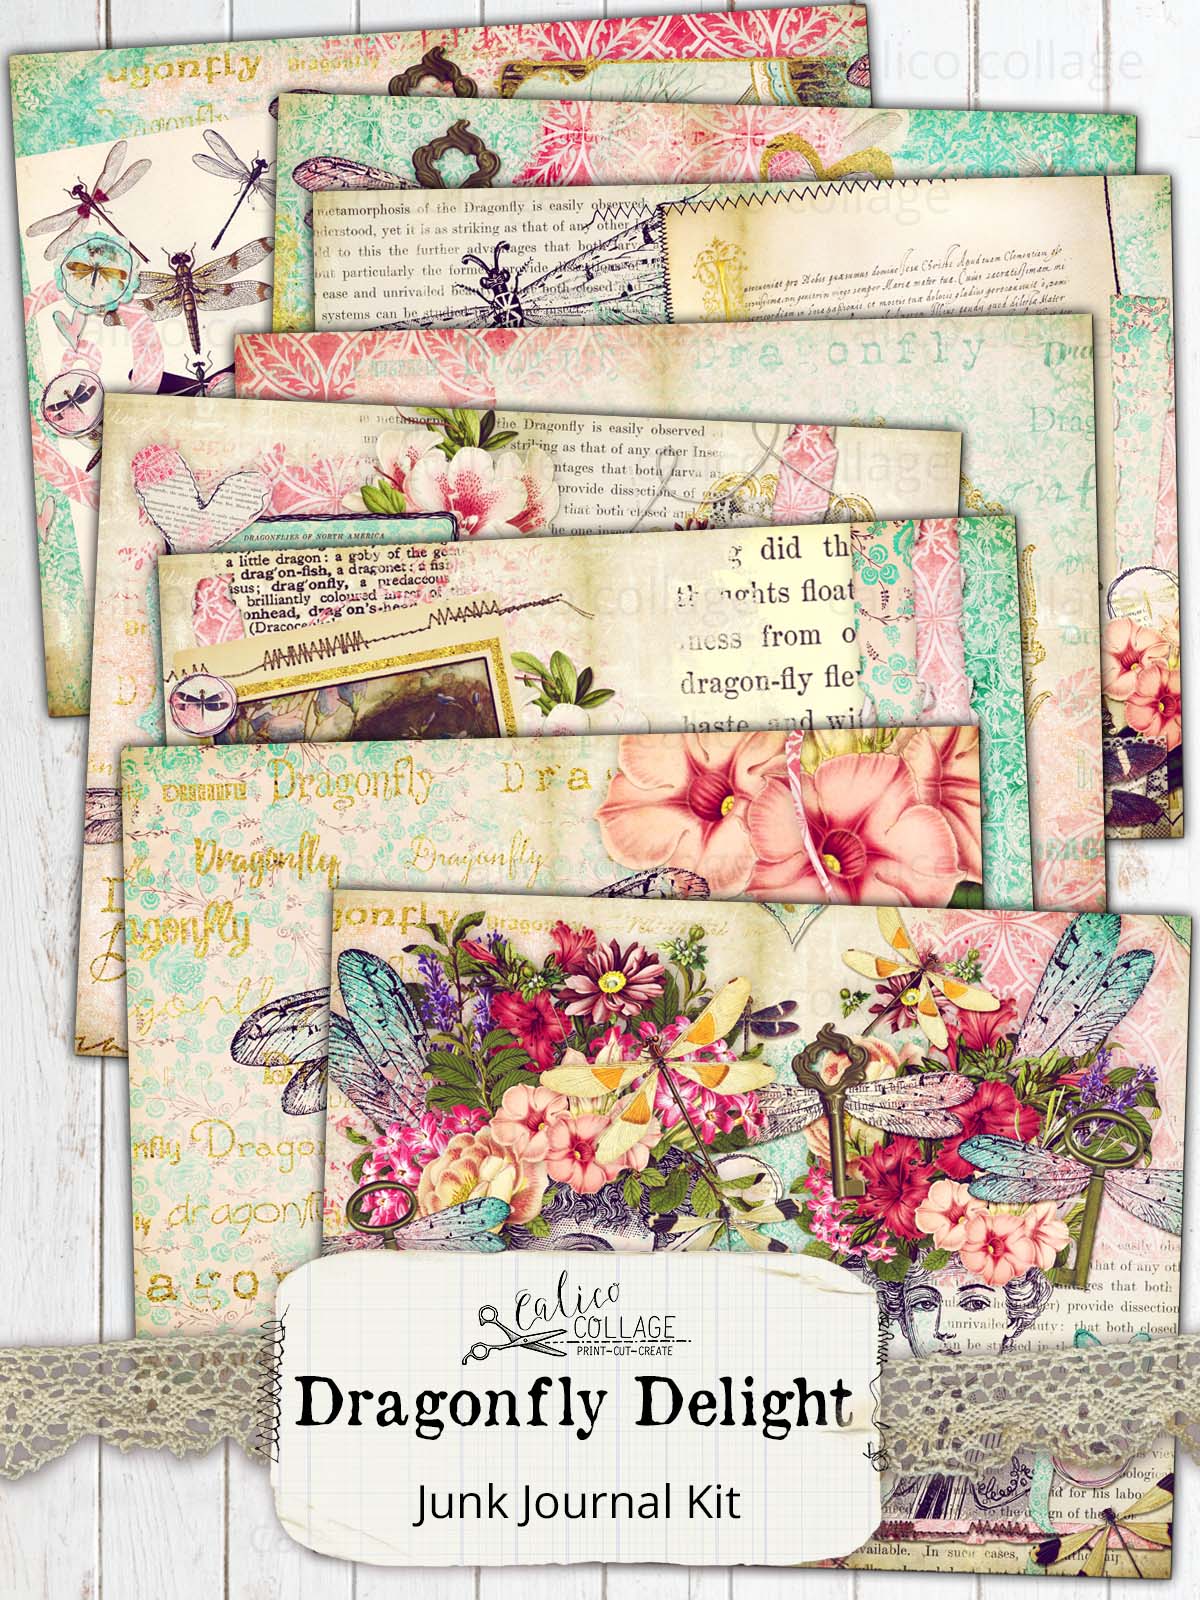 One Fine Day Printable Junk Journal Kit – CalicoCollage